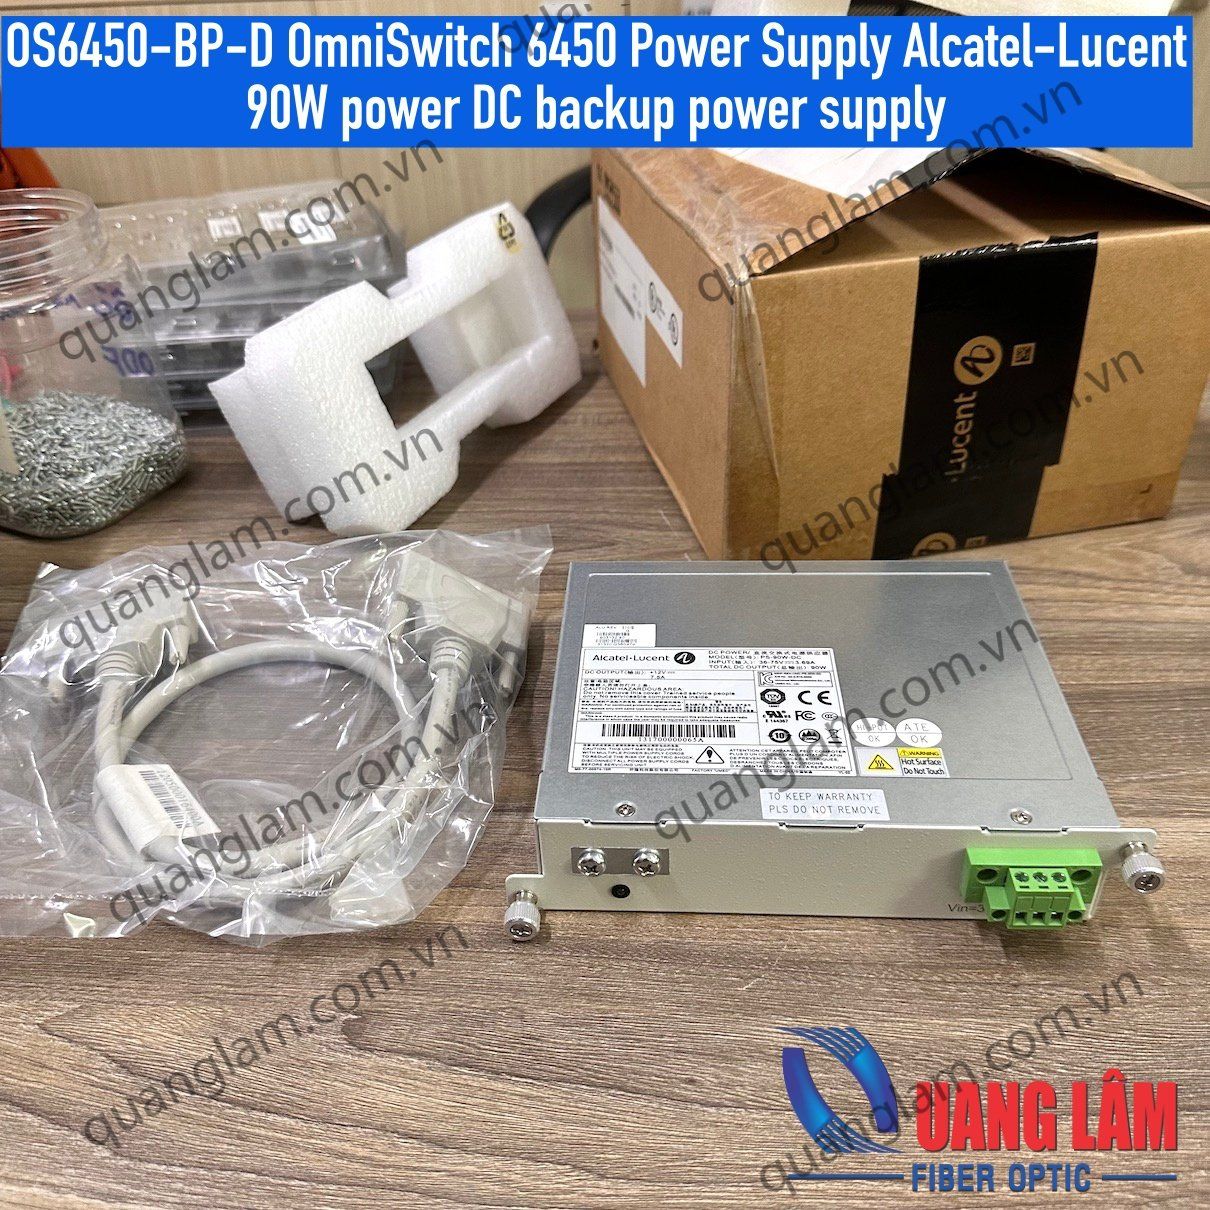 OS6450-BP-D OmniSwitch 6450 Power Supply Alcatel-Lucent